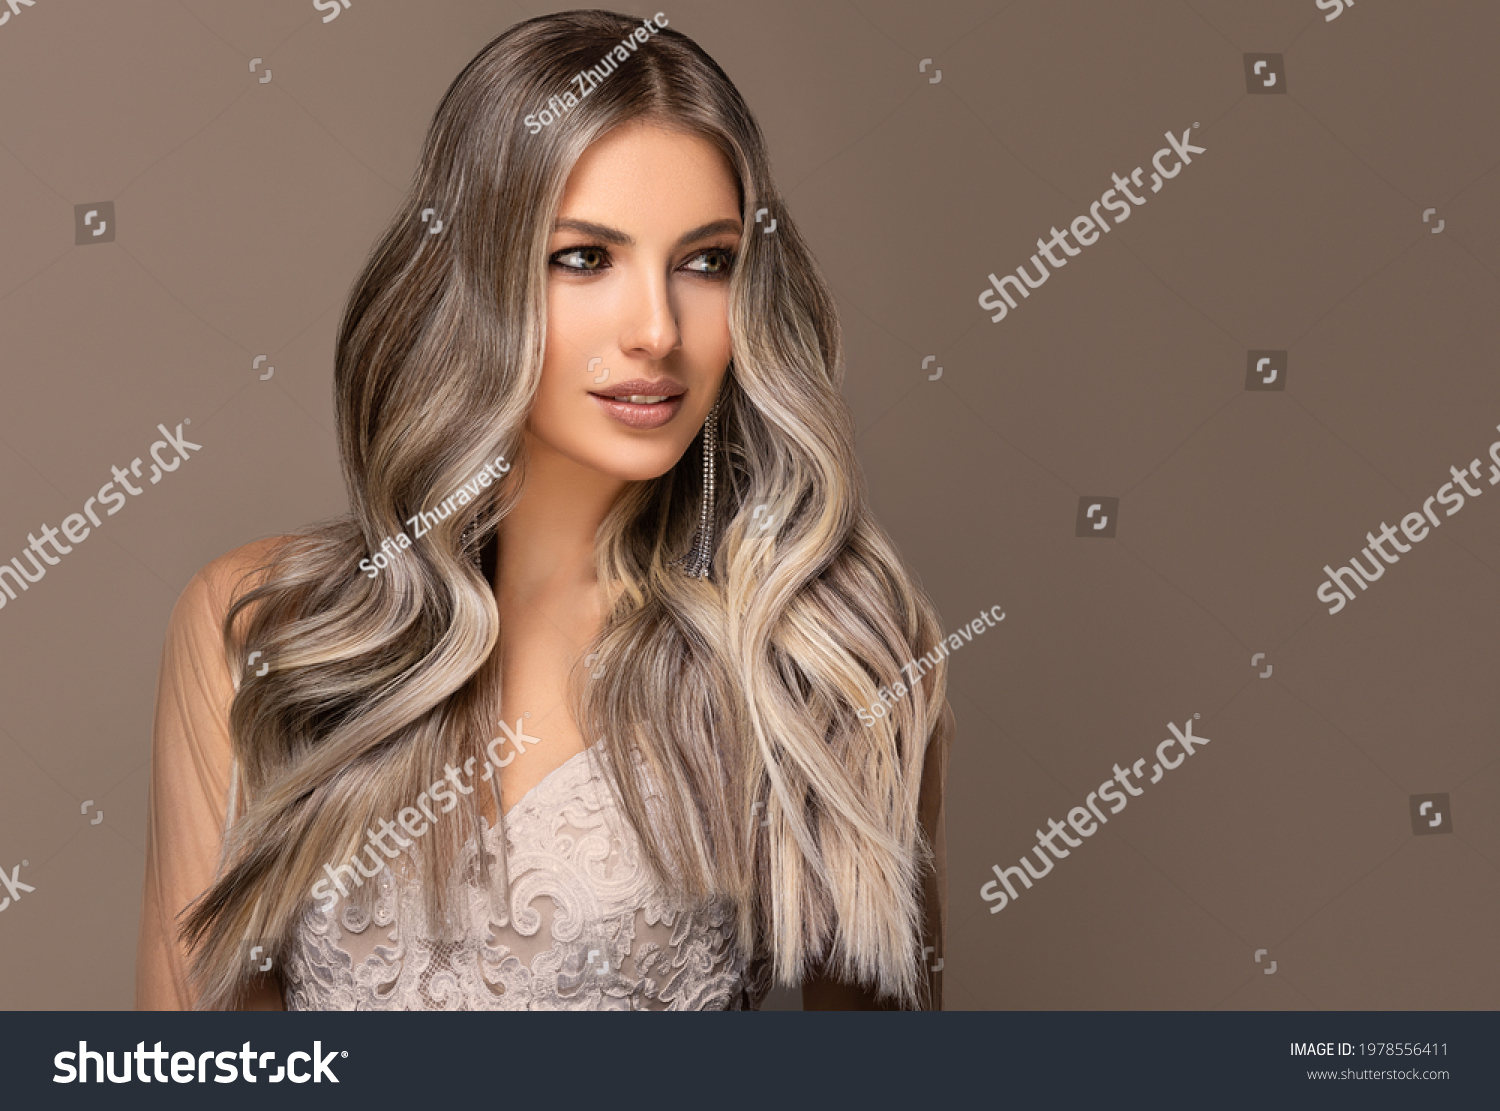 beautiful girl  hair coloring in ultra blond. Stylish hairstyle curls done in a beauty salon. Fashion, cosmetics and makeup. #1978556411